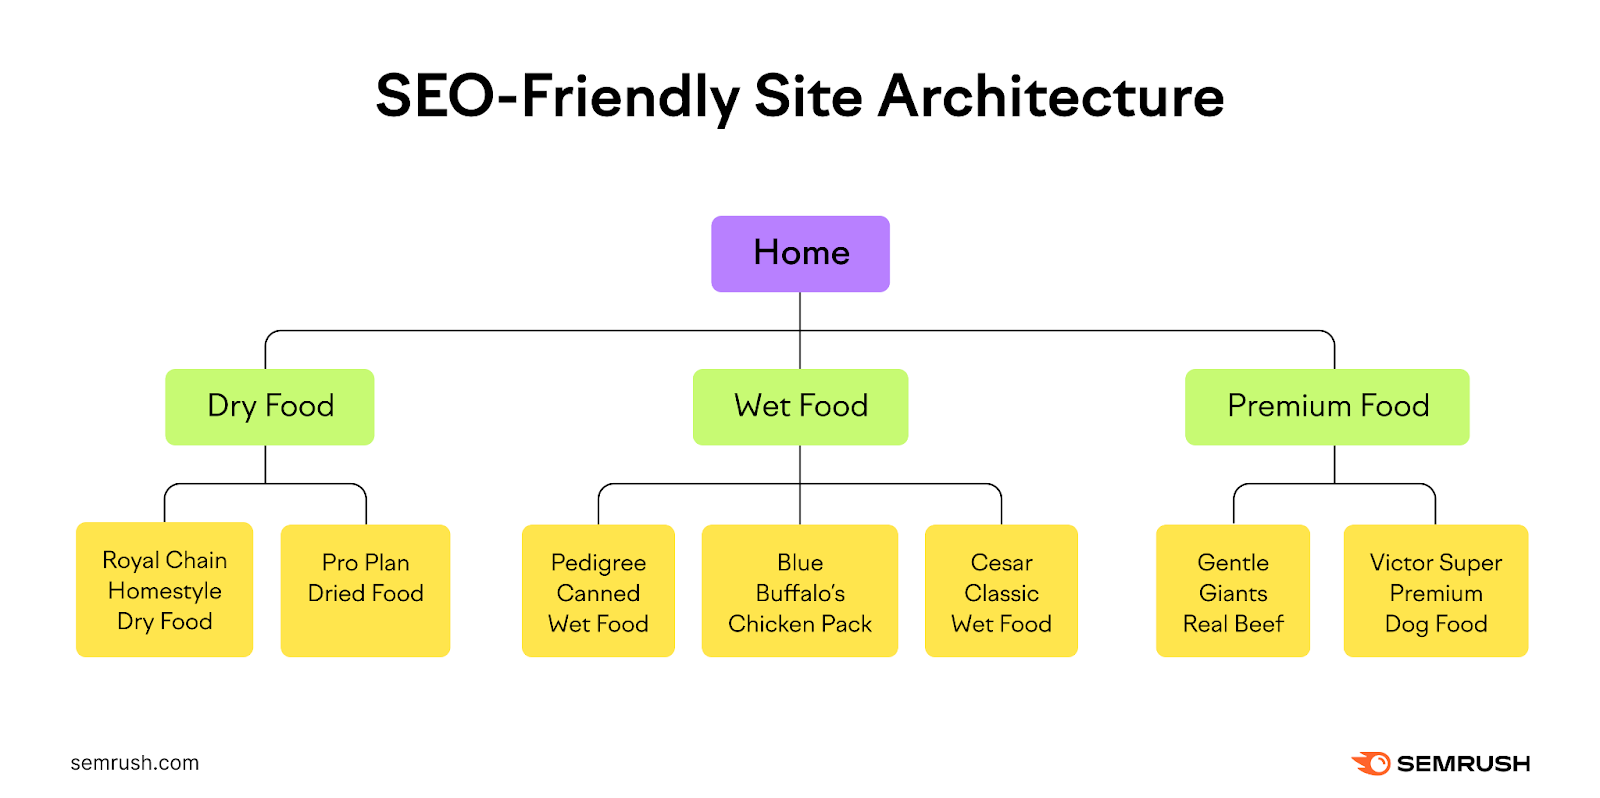 An example of SEO-friendly site architecture with defined categories related to an ecommerce website selling dog food